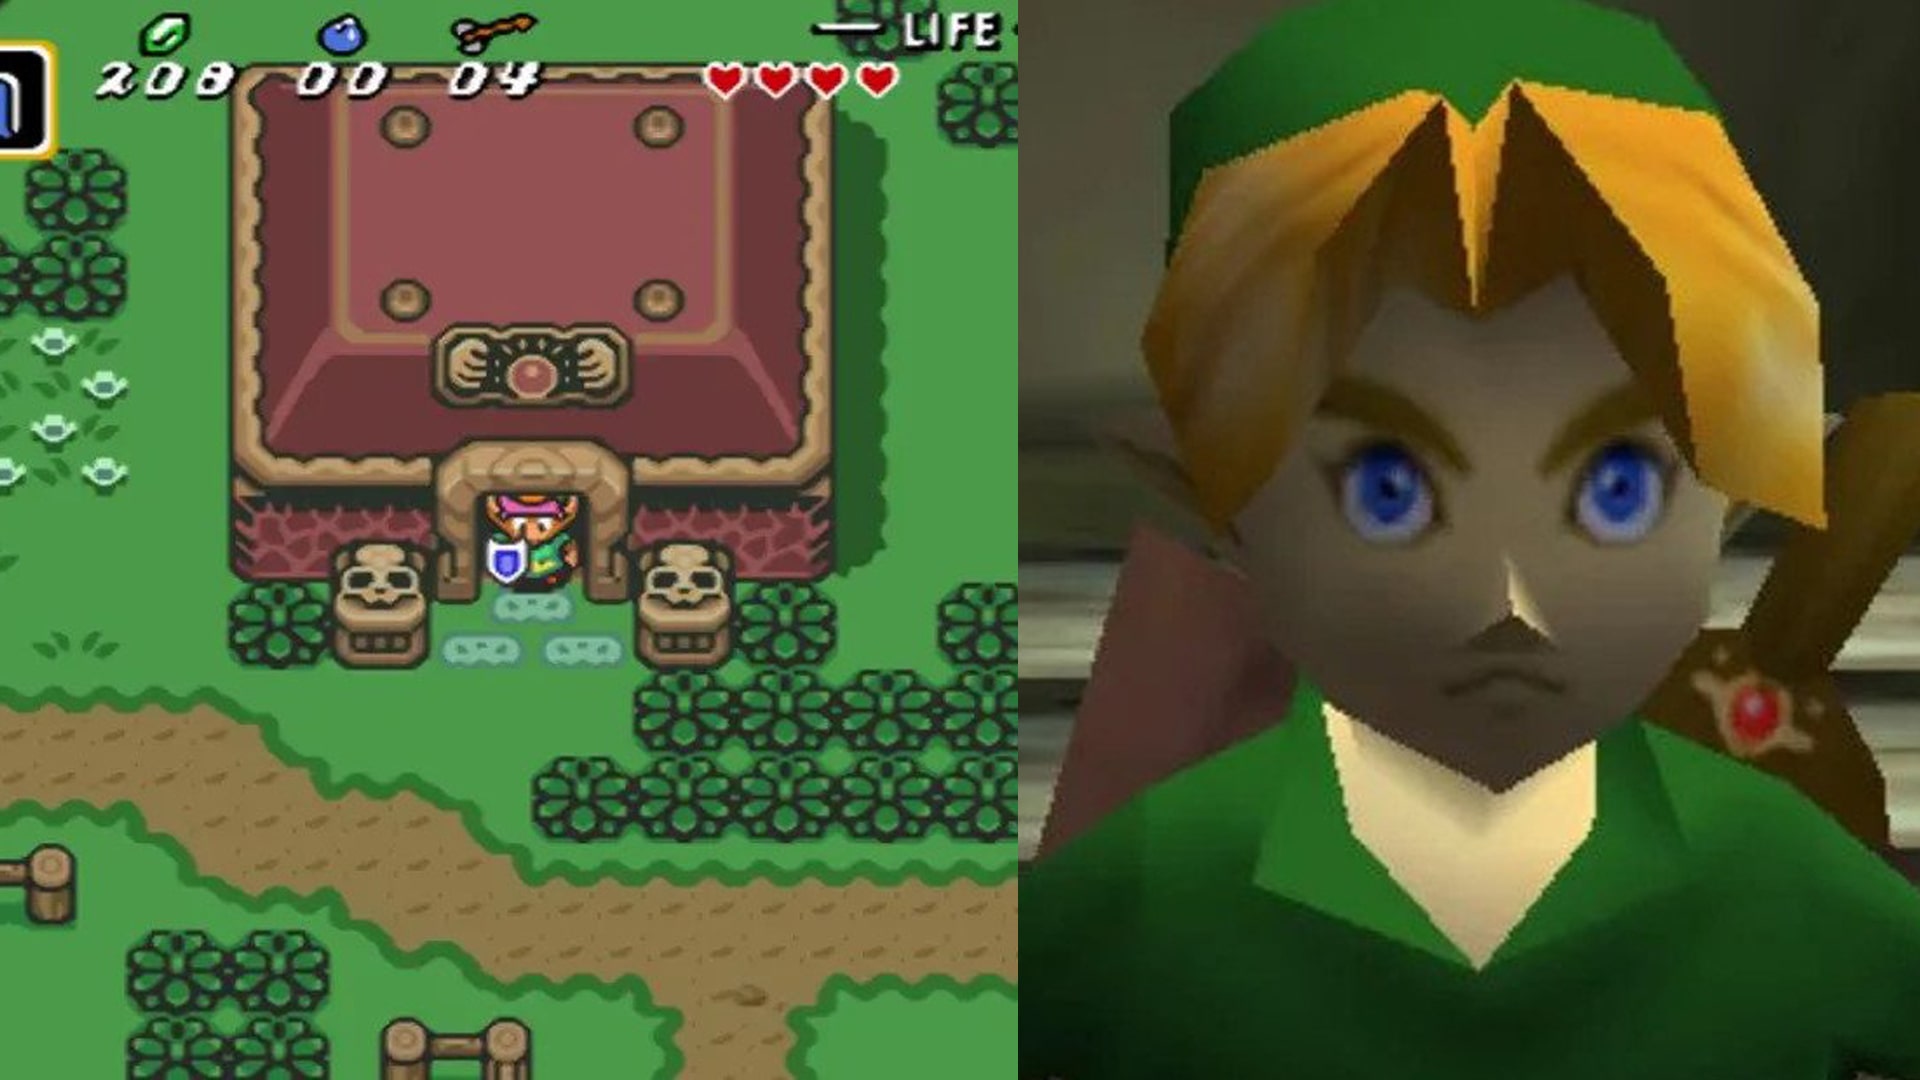 Comparative View of 2D and 3D Zelda Games Highlighting Ocarina of Time